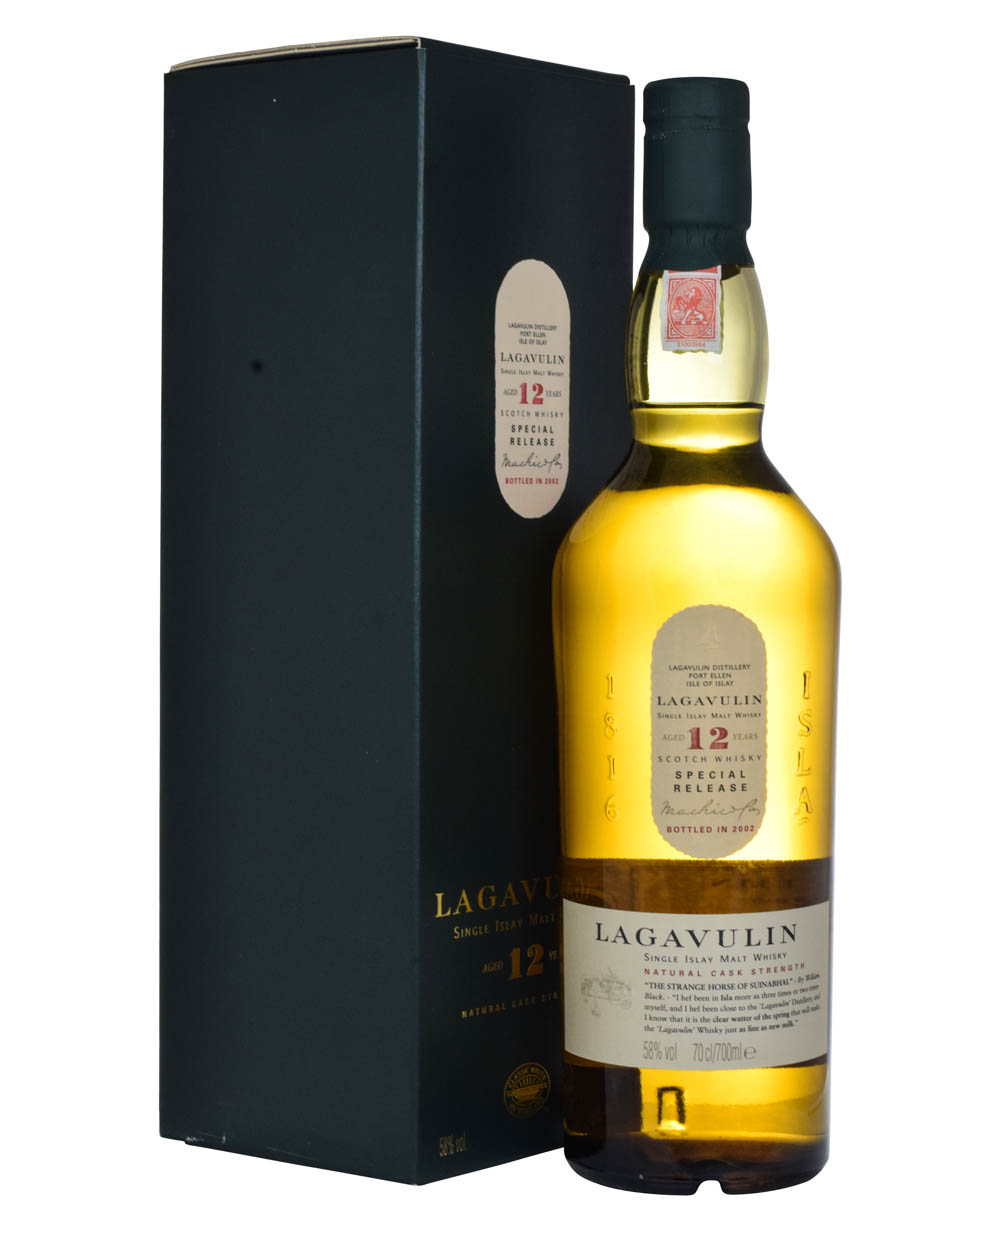 Lagavulin 12 Years Old Diageo 2002 Special Release Box Musthave Malts MHM